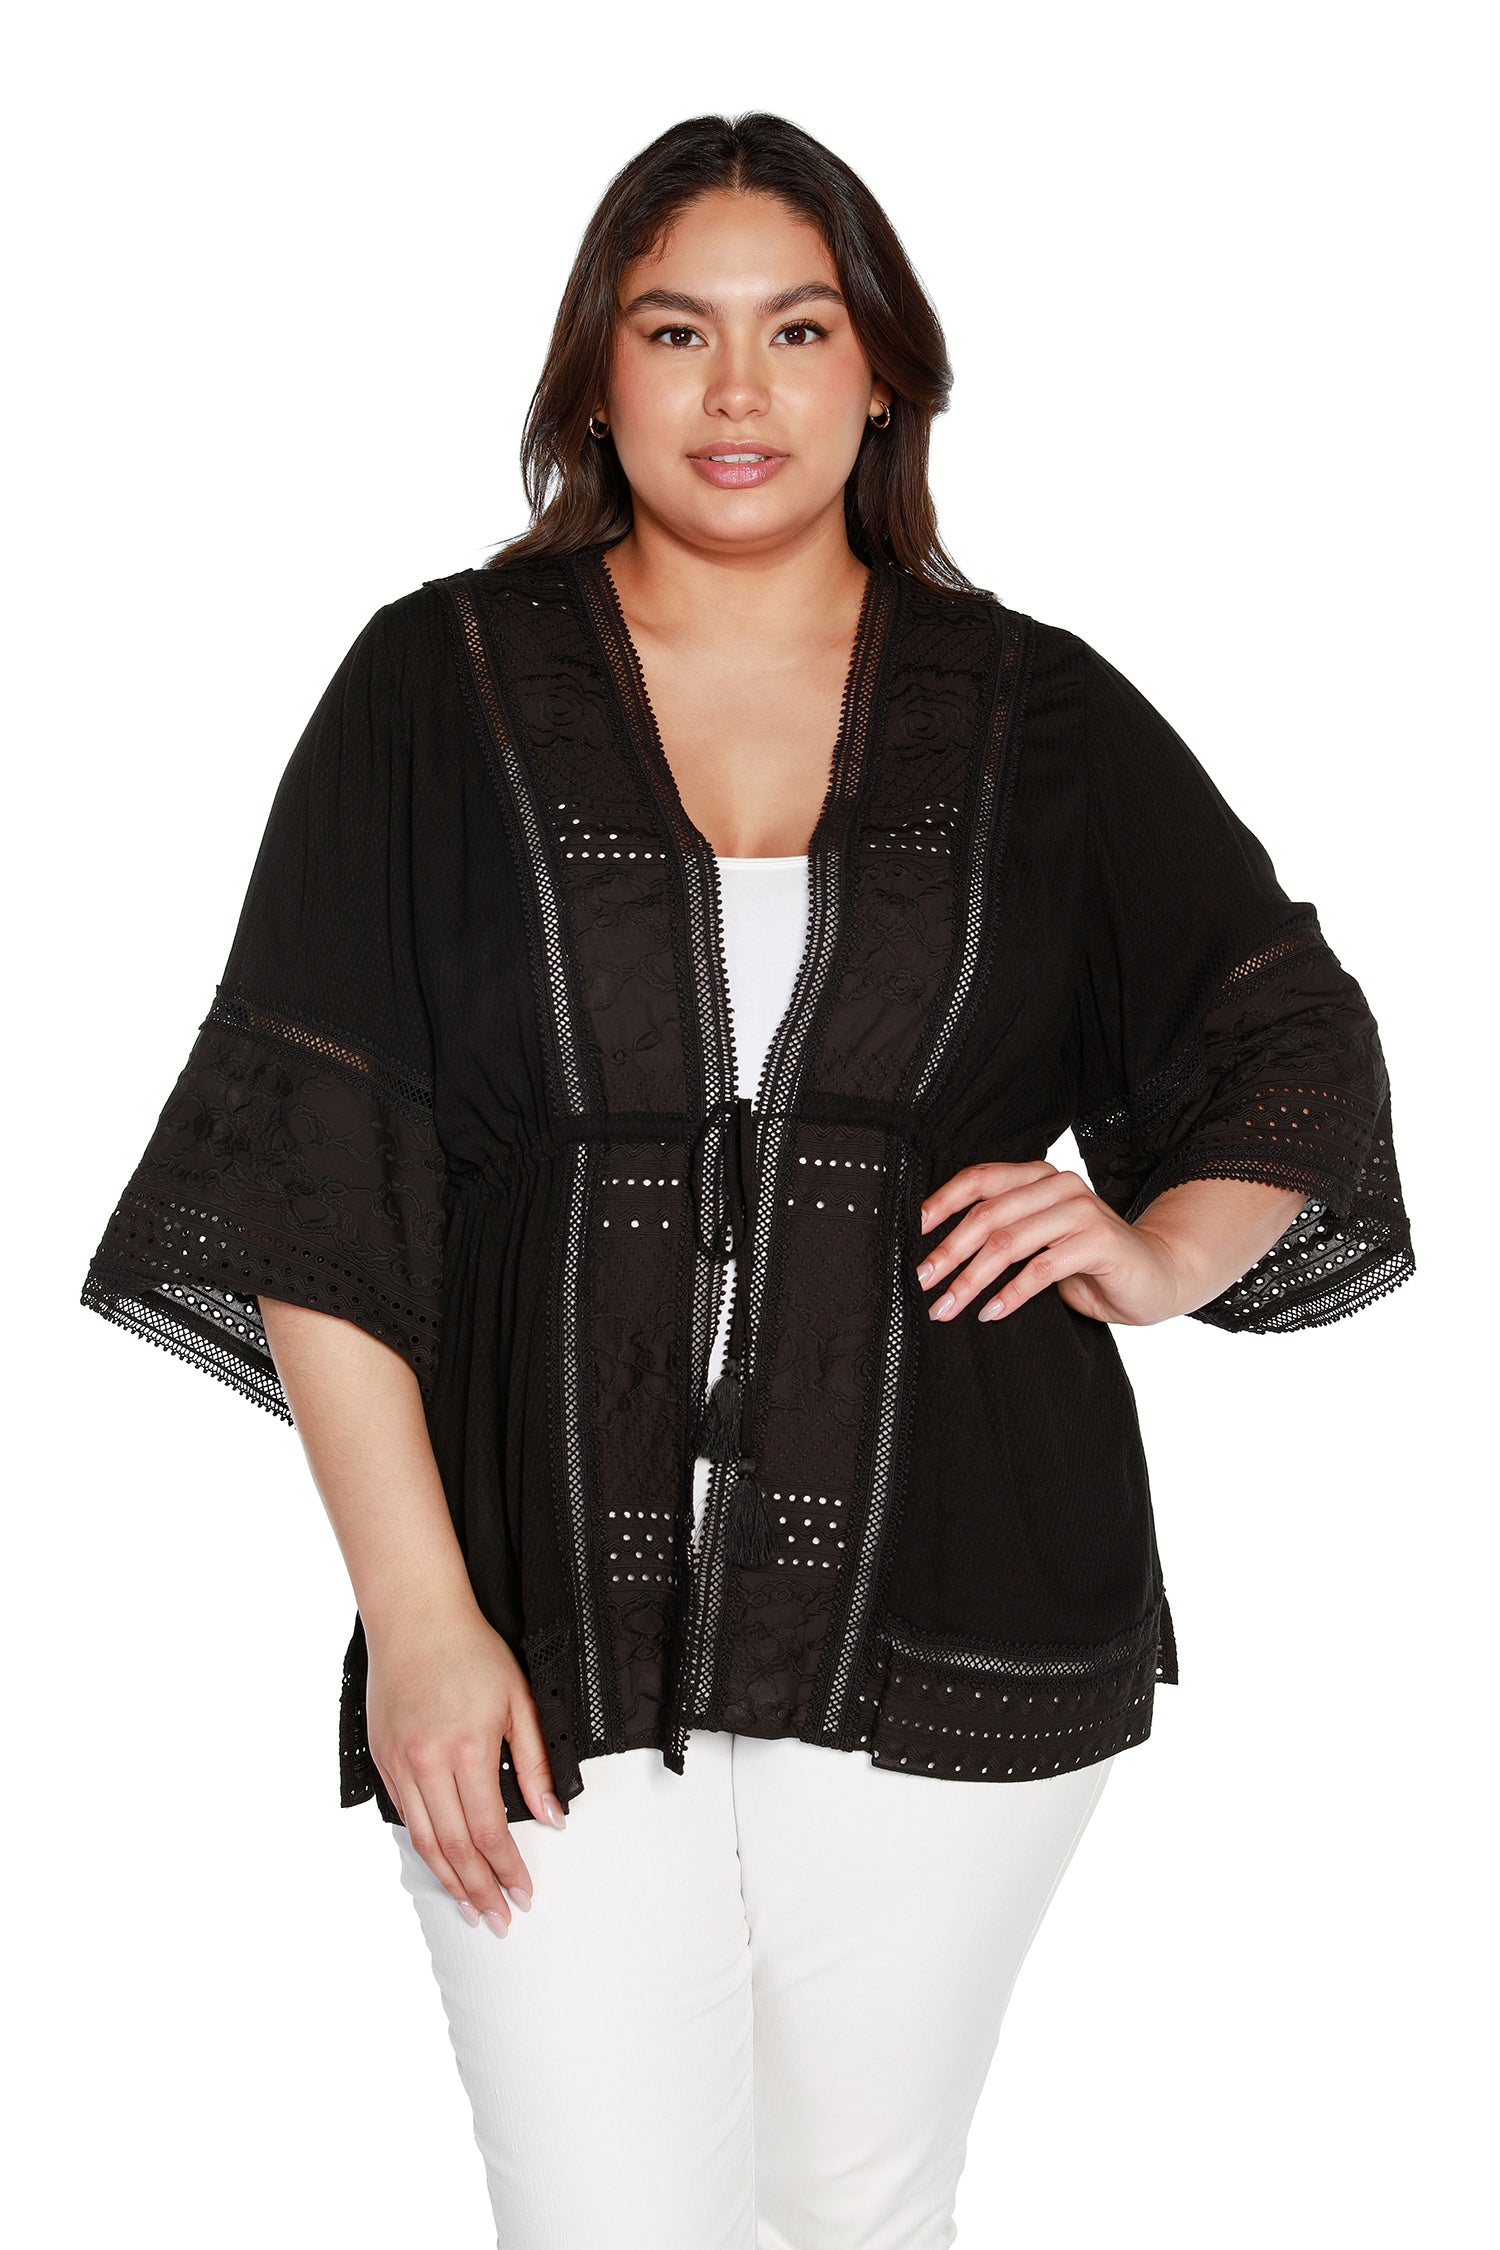 Women's Cotton Kimono with Eyelet Lace and Embroidery | Curvy